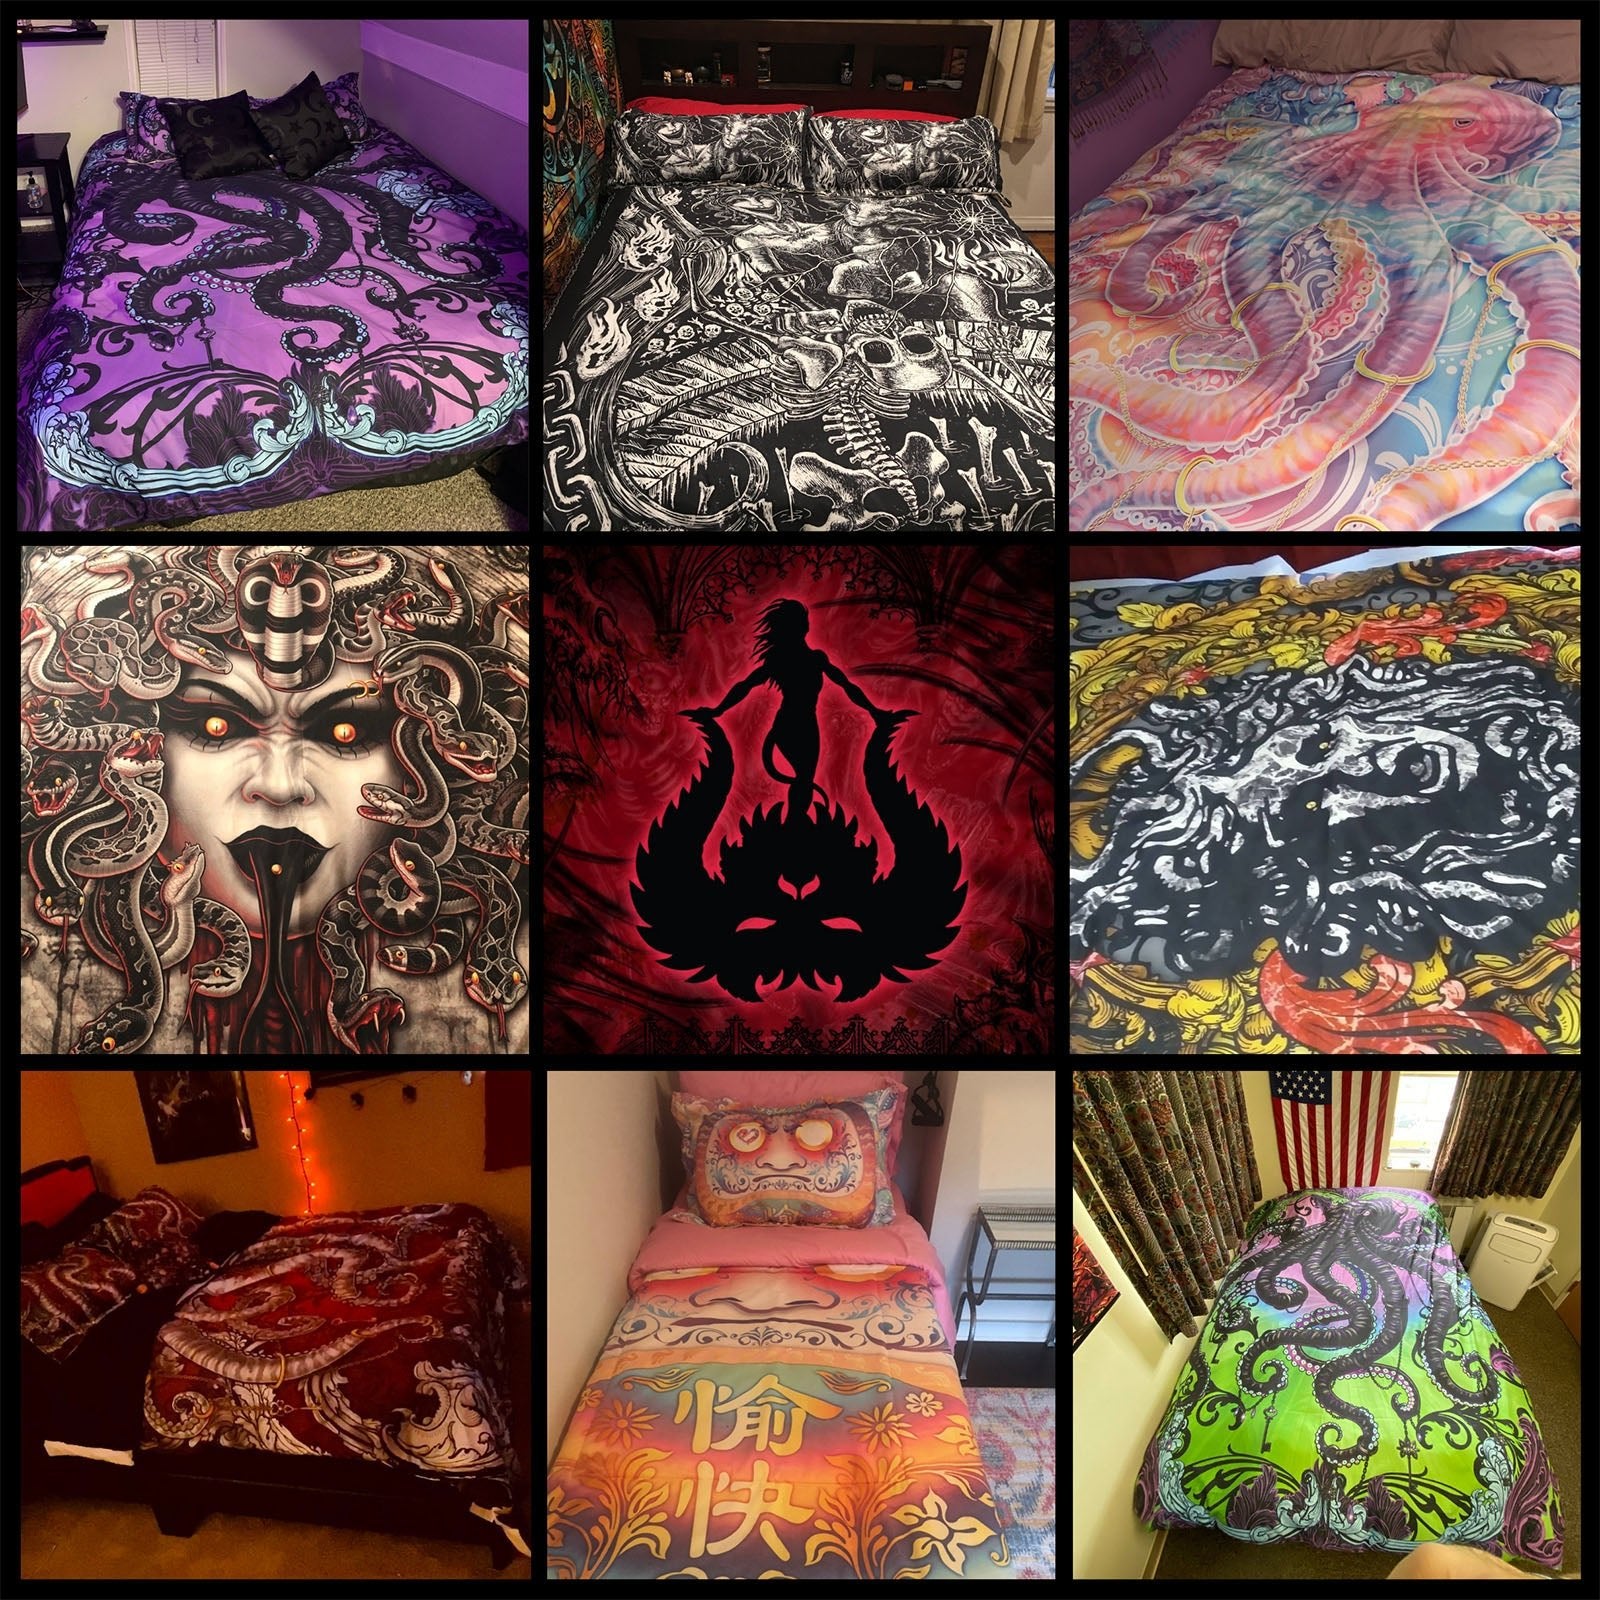 Horror Bedding Set, Comforter and Duvet, Gothic Hell, Satanic Bed Cover and Bedroom Decor, Goth Art, King, Queen and Twin Size - Purging - Abysm Internal